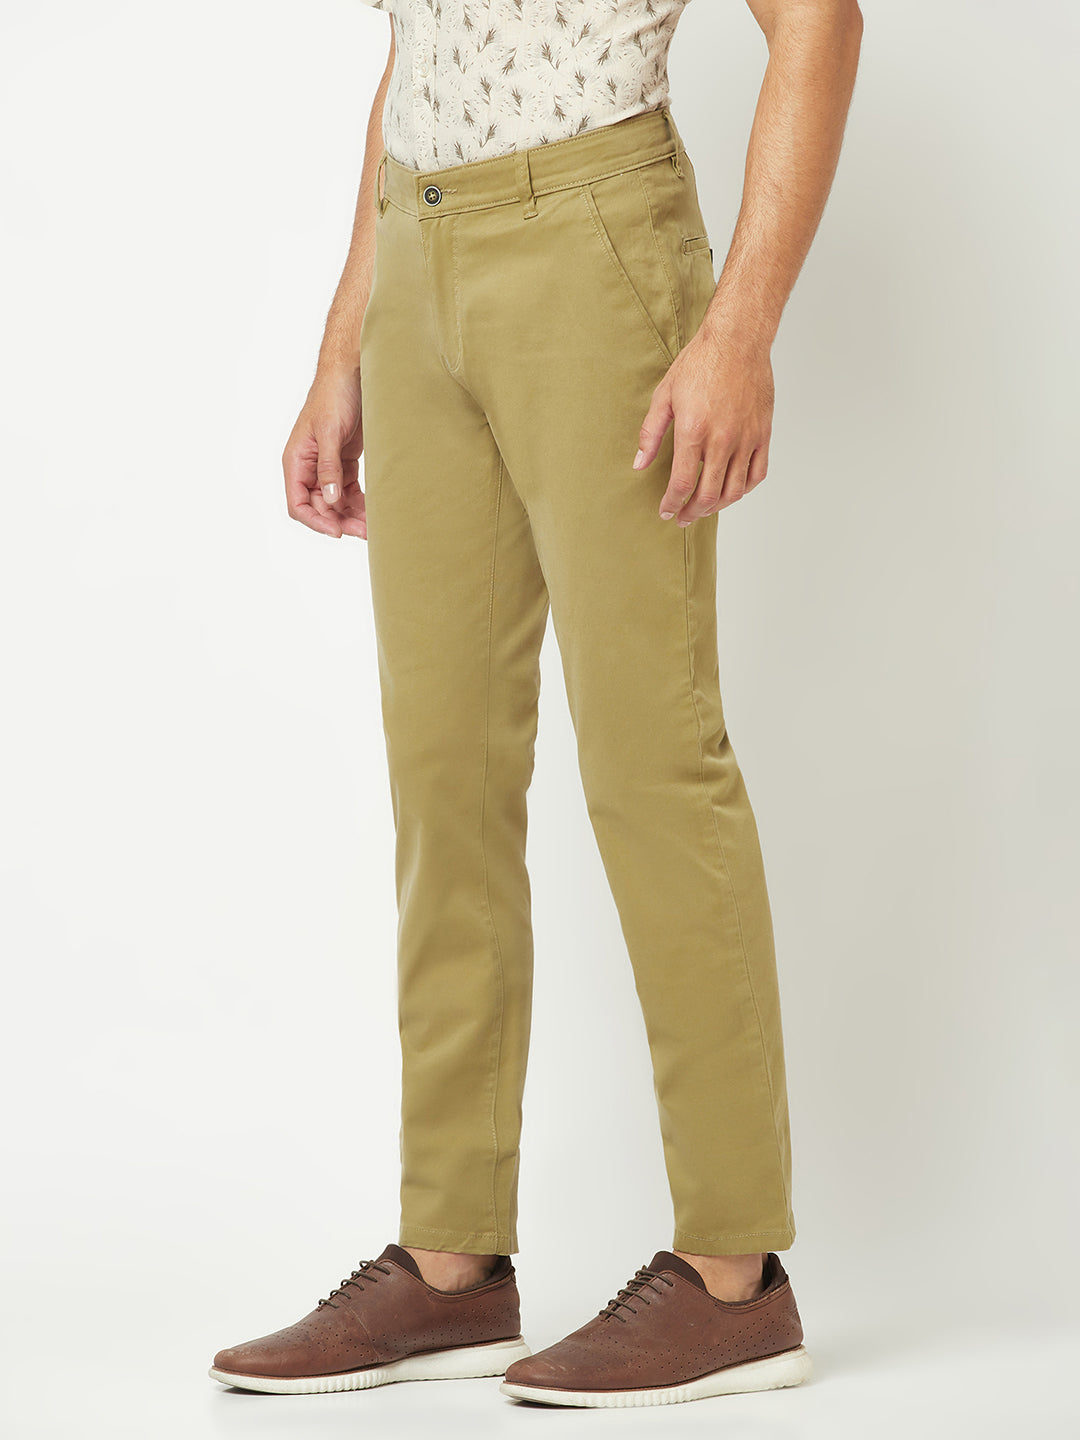 Work-Outfit Idea: Olive Pants, Take Two. How to Untuck + STILL Look  Polished | Glamour